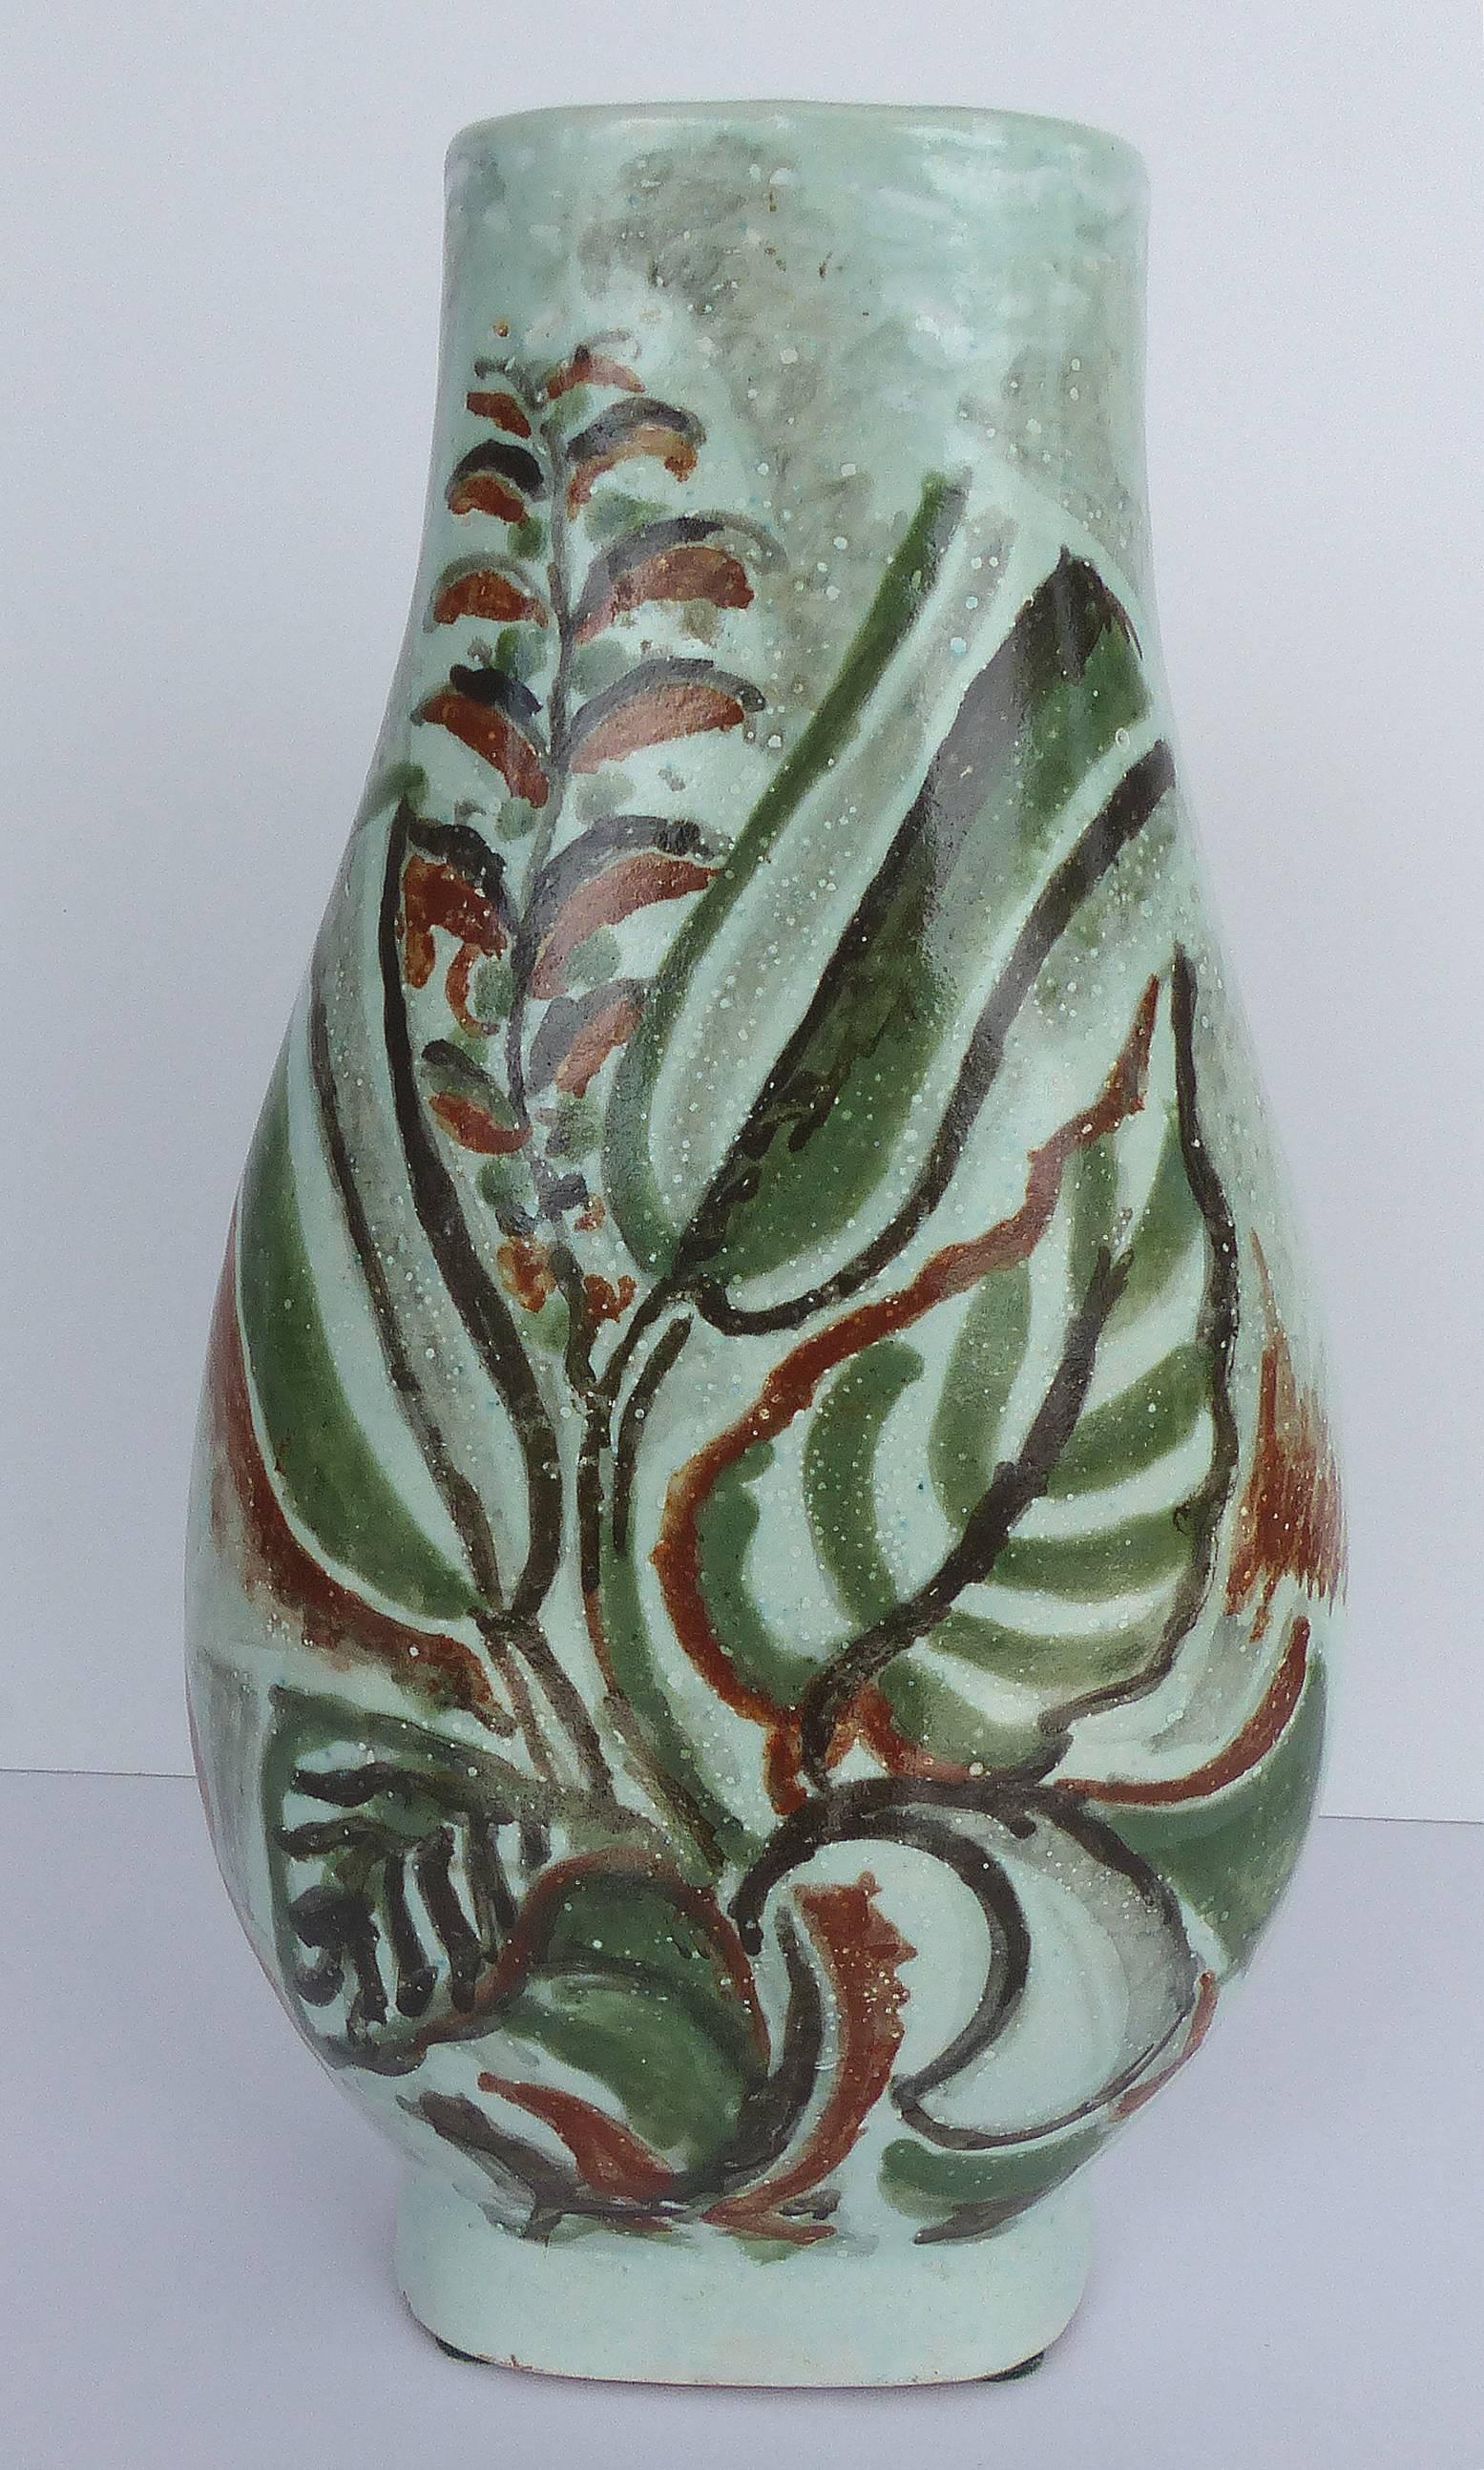 René Buthaud, ceramic vase of woman with fan, circa 1920s

Offered for sale is a hand painted original René Buthaud glazed ceramic vase depicting a woman with a fan. Signed with initials on the underside. René Buthaud was seen as the most